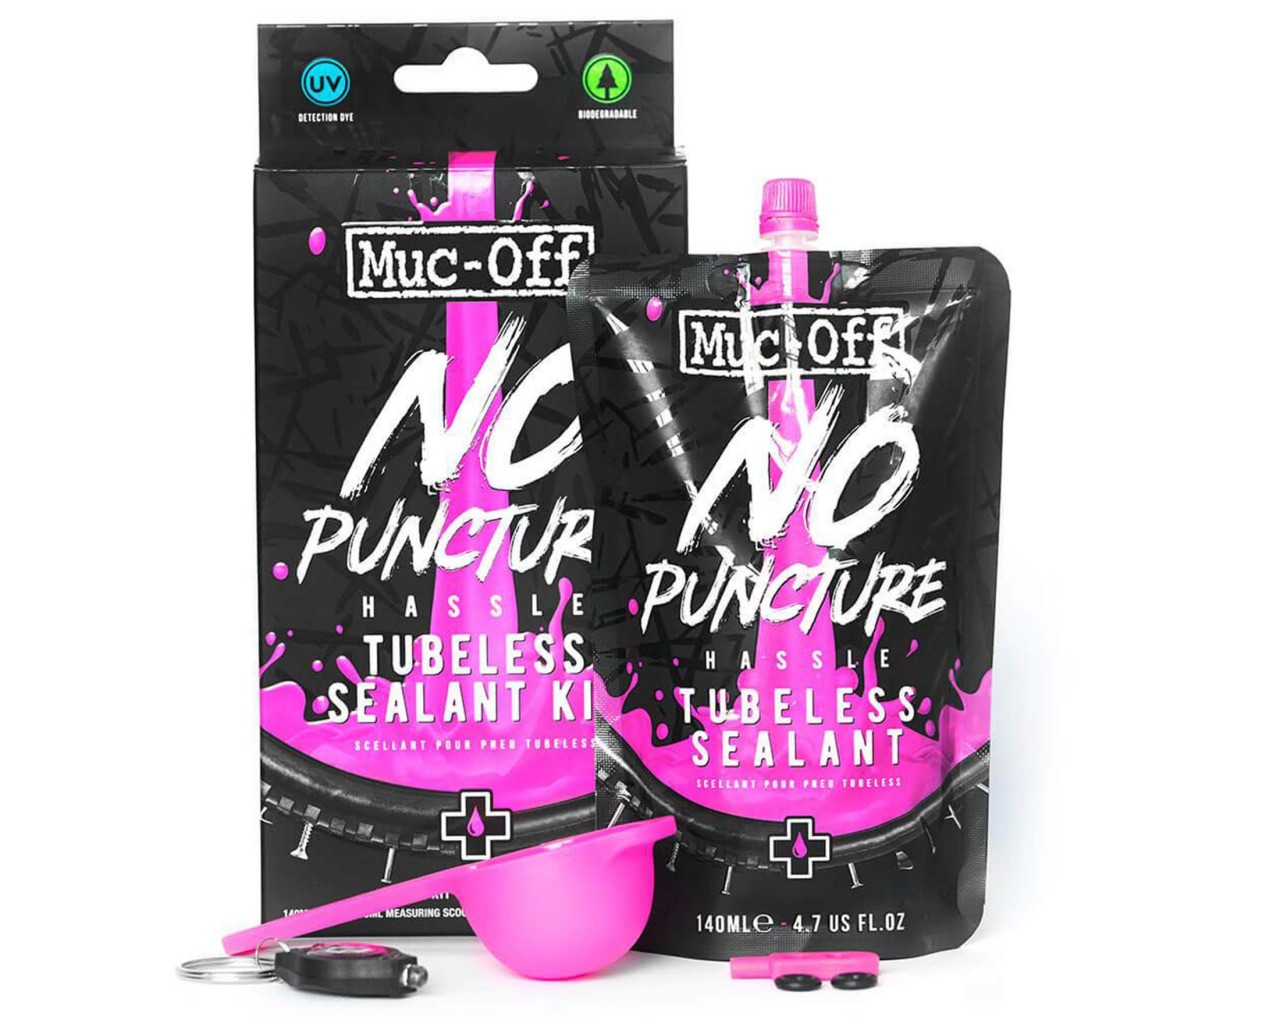 Muc Off - No Puncture Hassle 140 ml